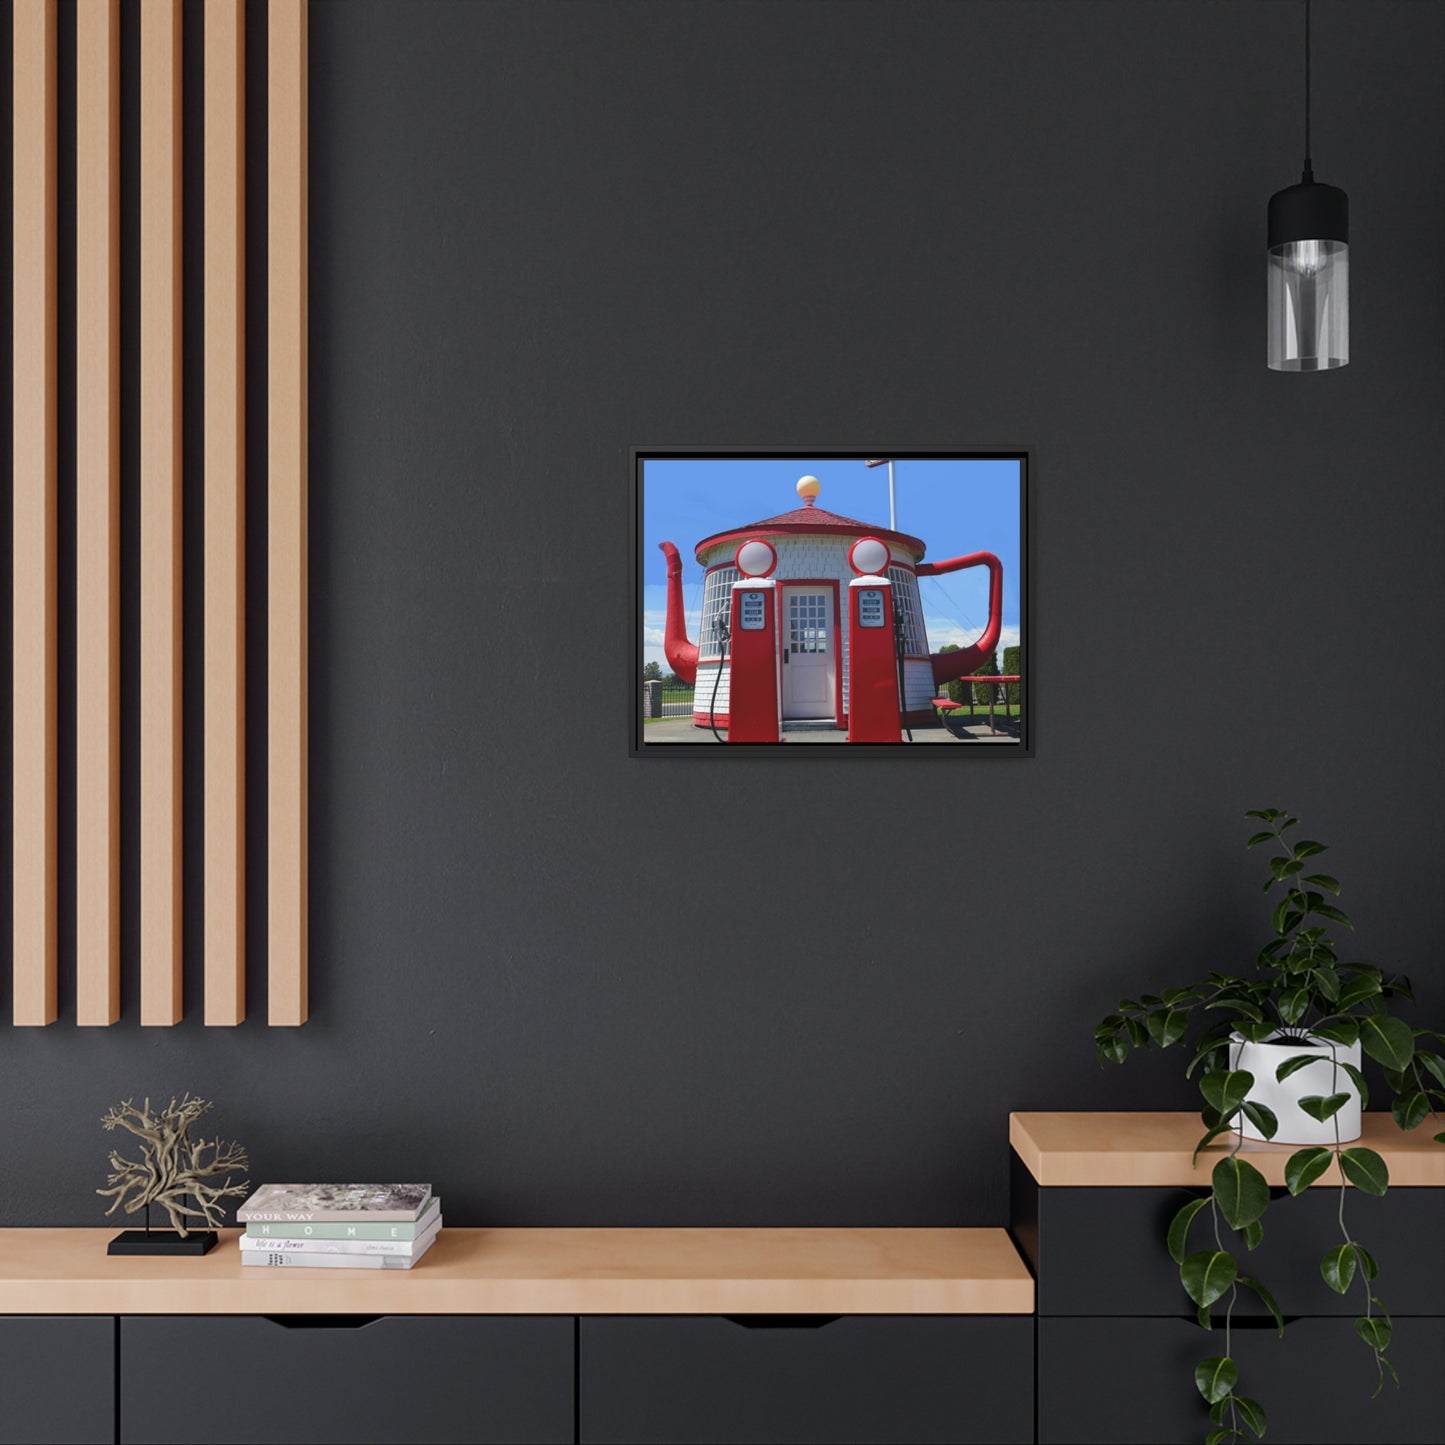 Awesome Teapot Dome Service Station - Matte Canvas, Black Frame - Fry1Productions